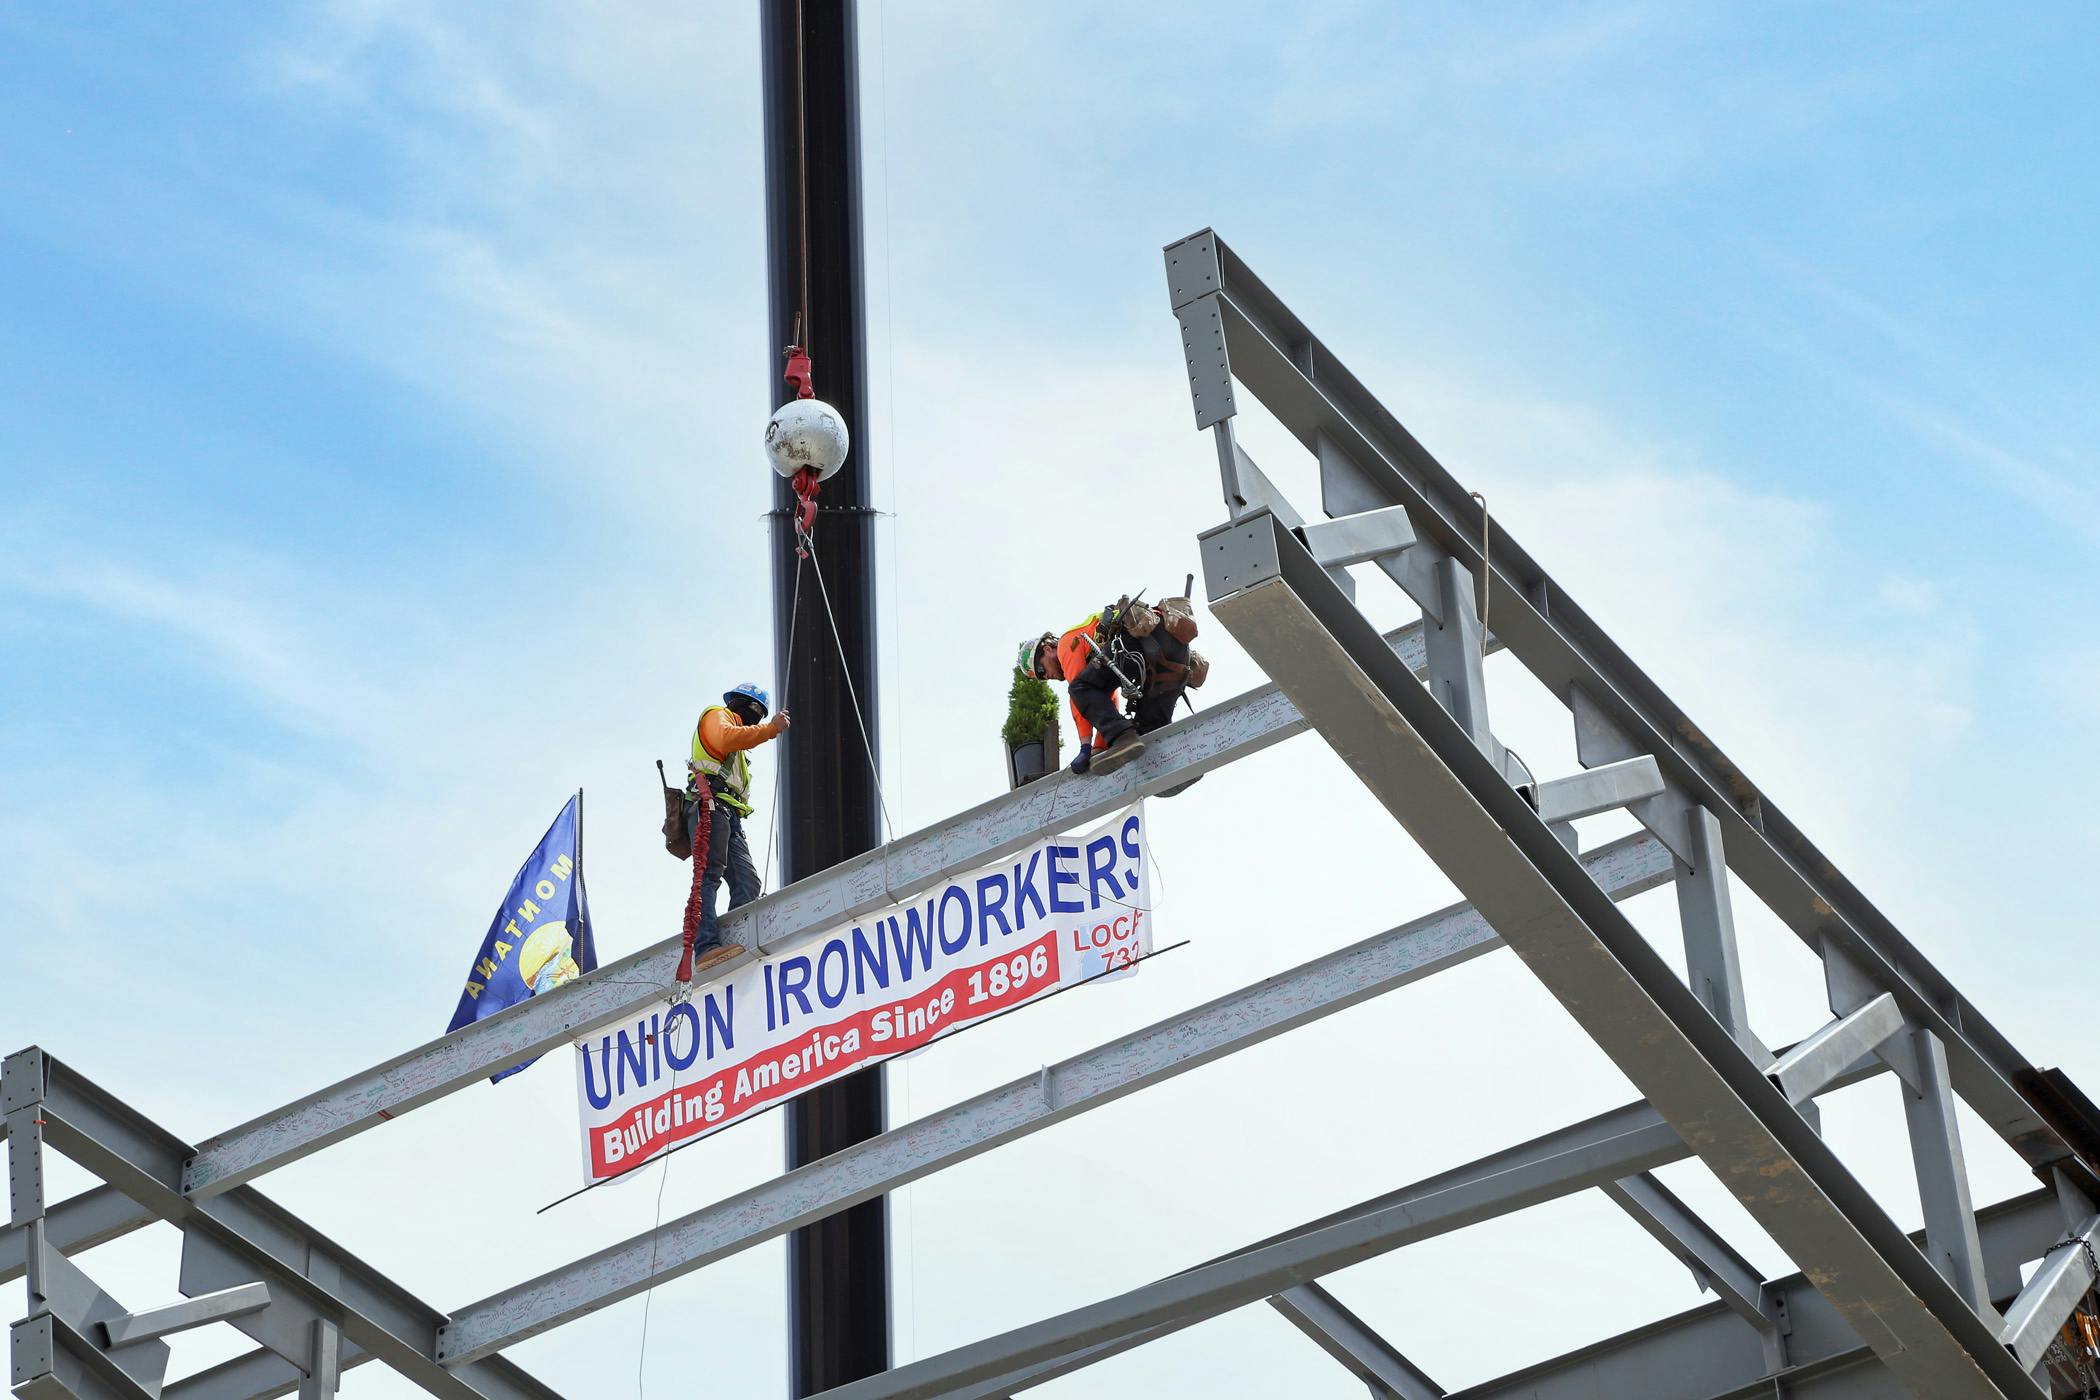 May 17, 2022 Topping Out Ceremony